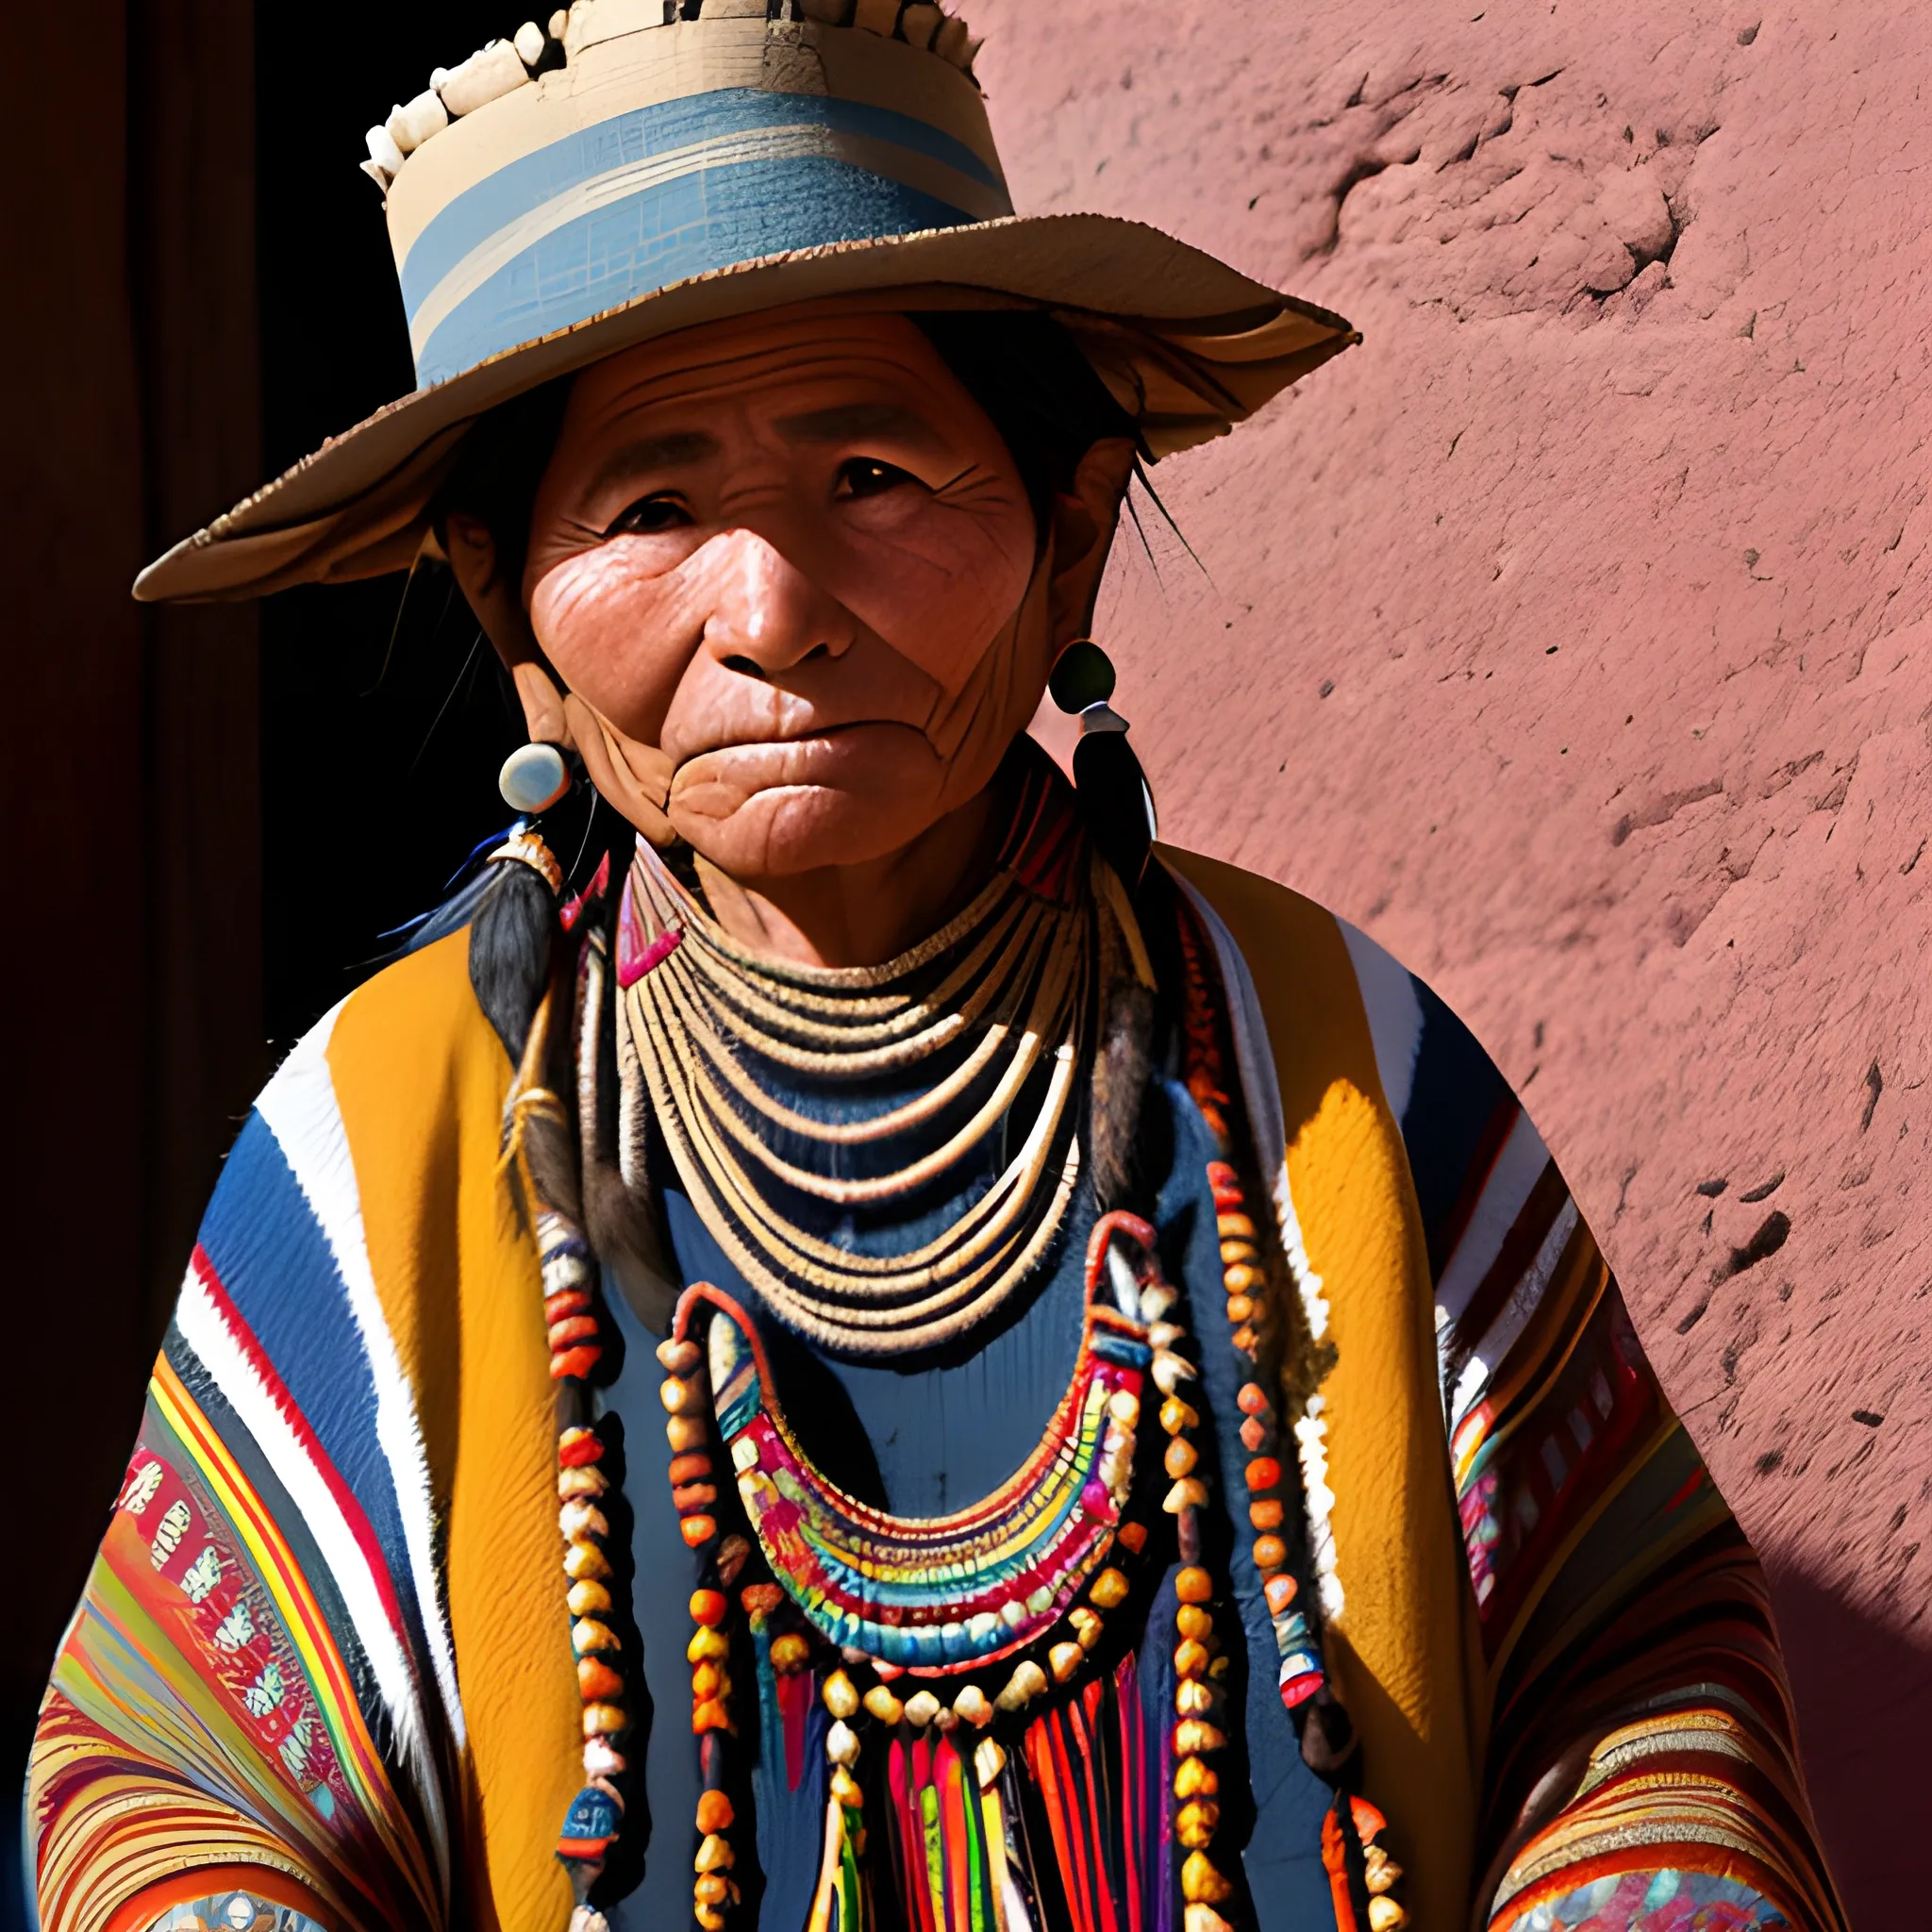  An Andean woman weaver, symbolizing tradition and ancestral resilience.